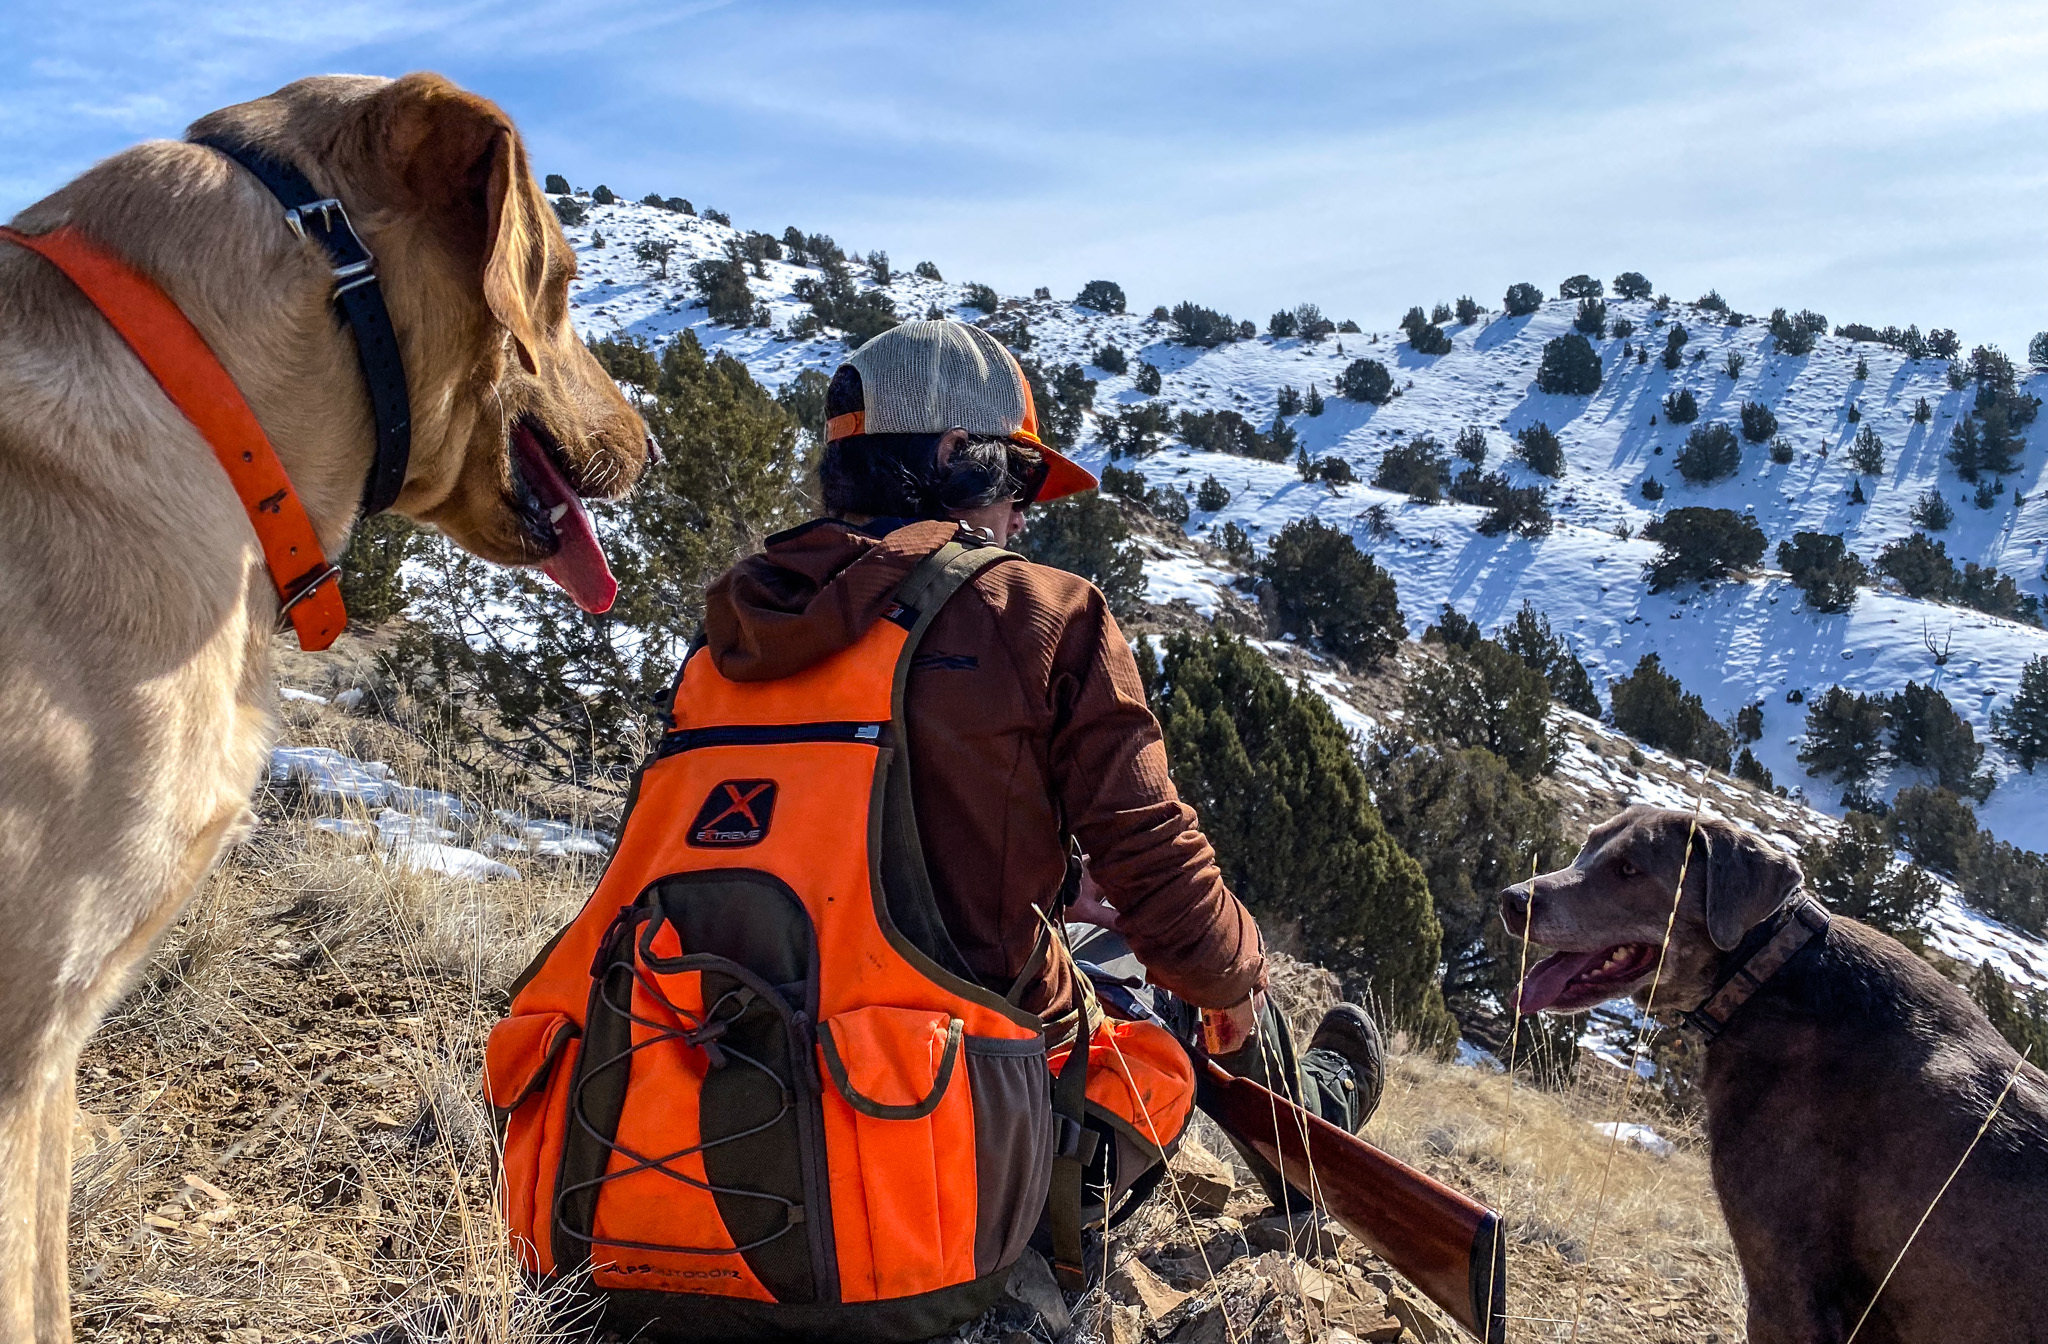 Alps Outdoorz makes the best value upland hunting vest.